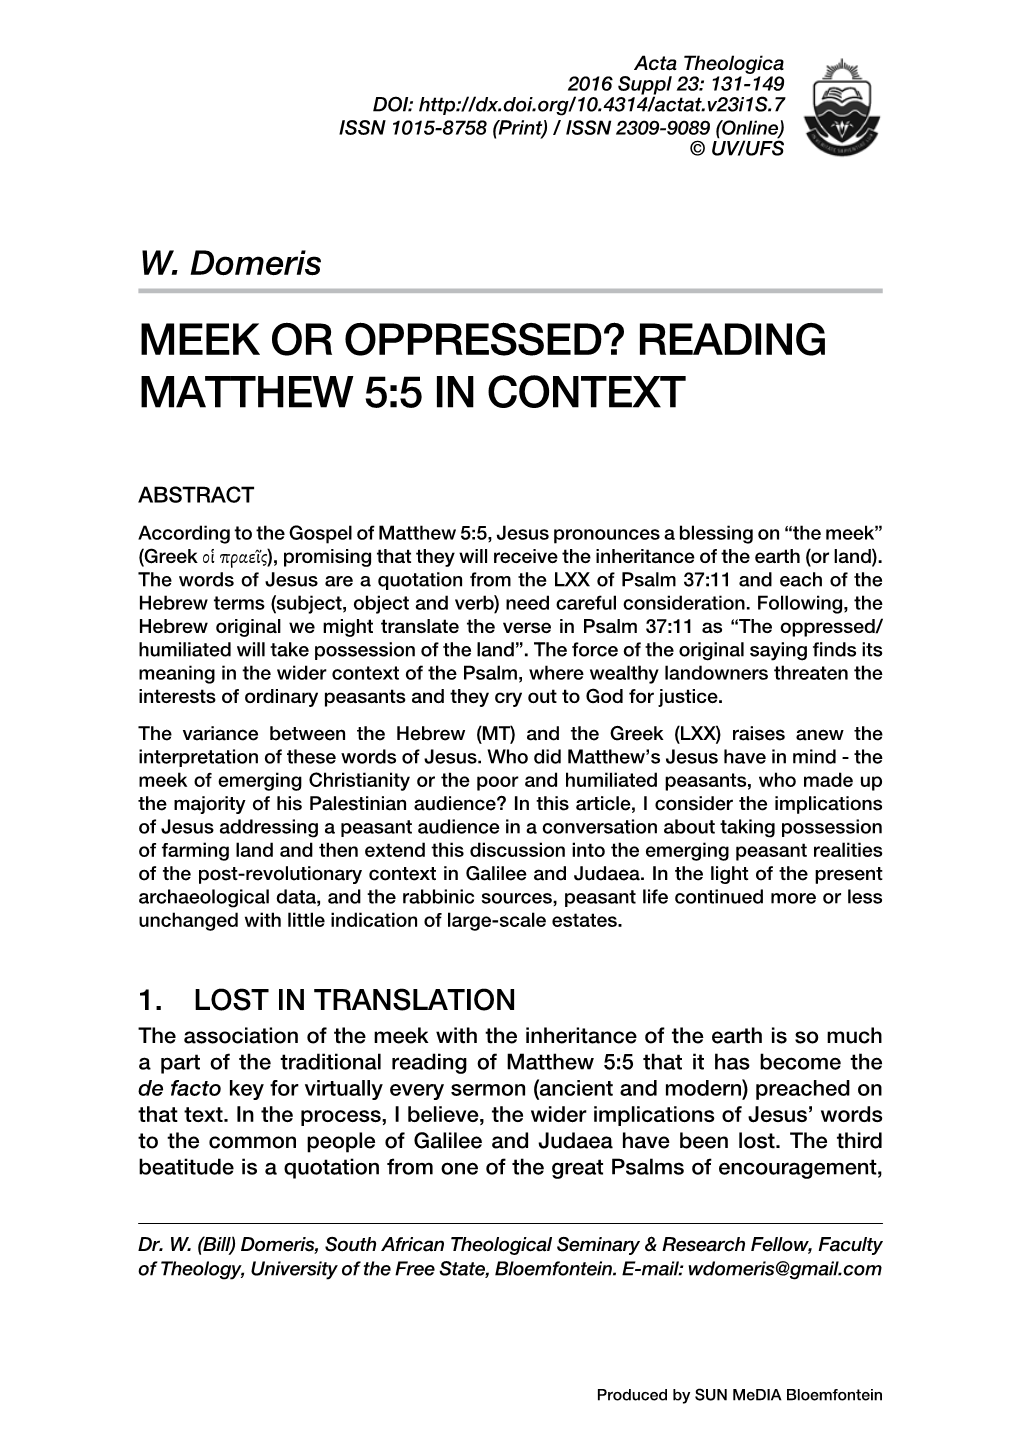 Meek Or Oppressed? Reading Matthew 5:5 in Context